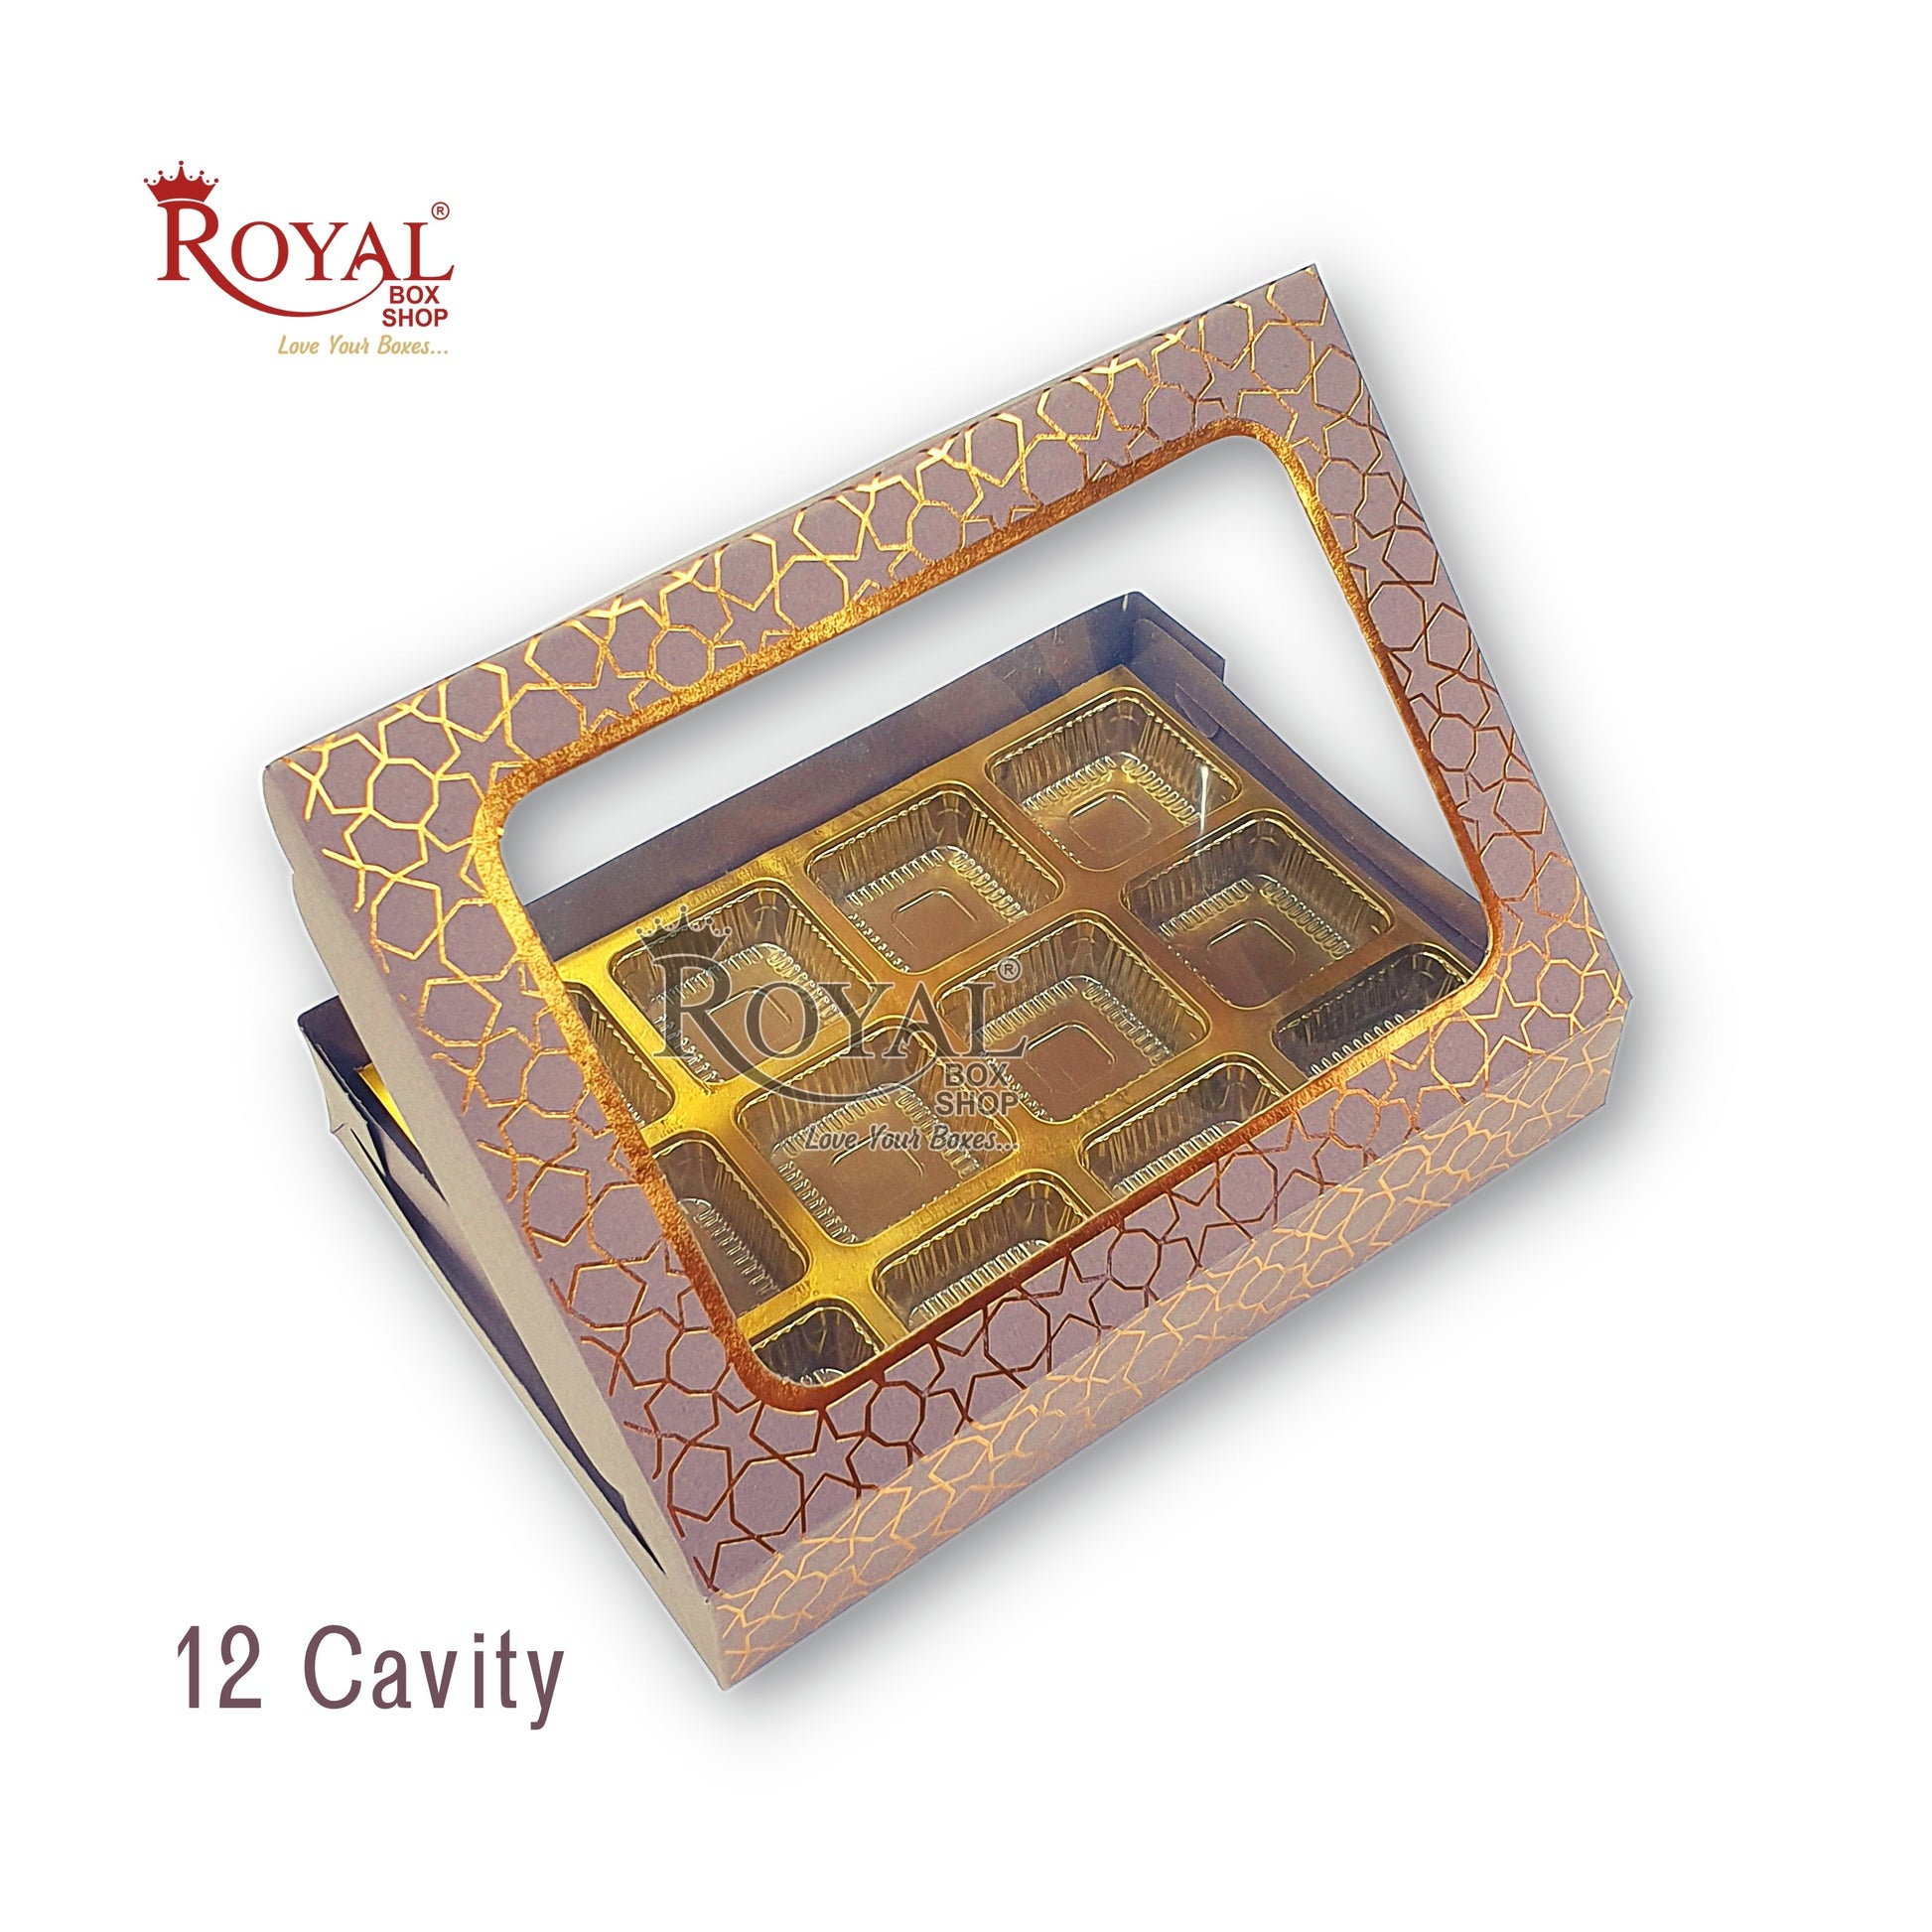 12 Cavity Chocolate Boxes I 7.5 x 5.5 x 1.25 inches I Brown Hexa Golden Foiling I For Valentine, Rakhi, Return Gifts Royal Box Shop